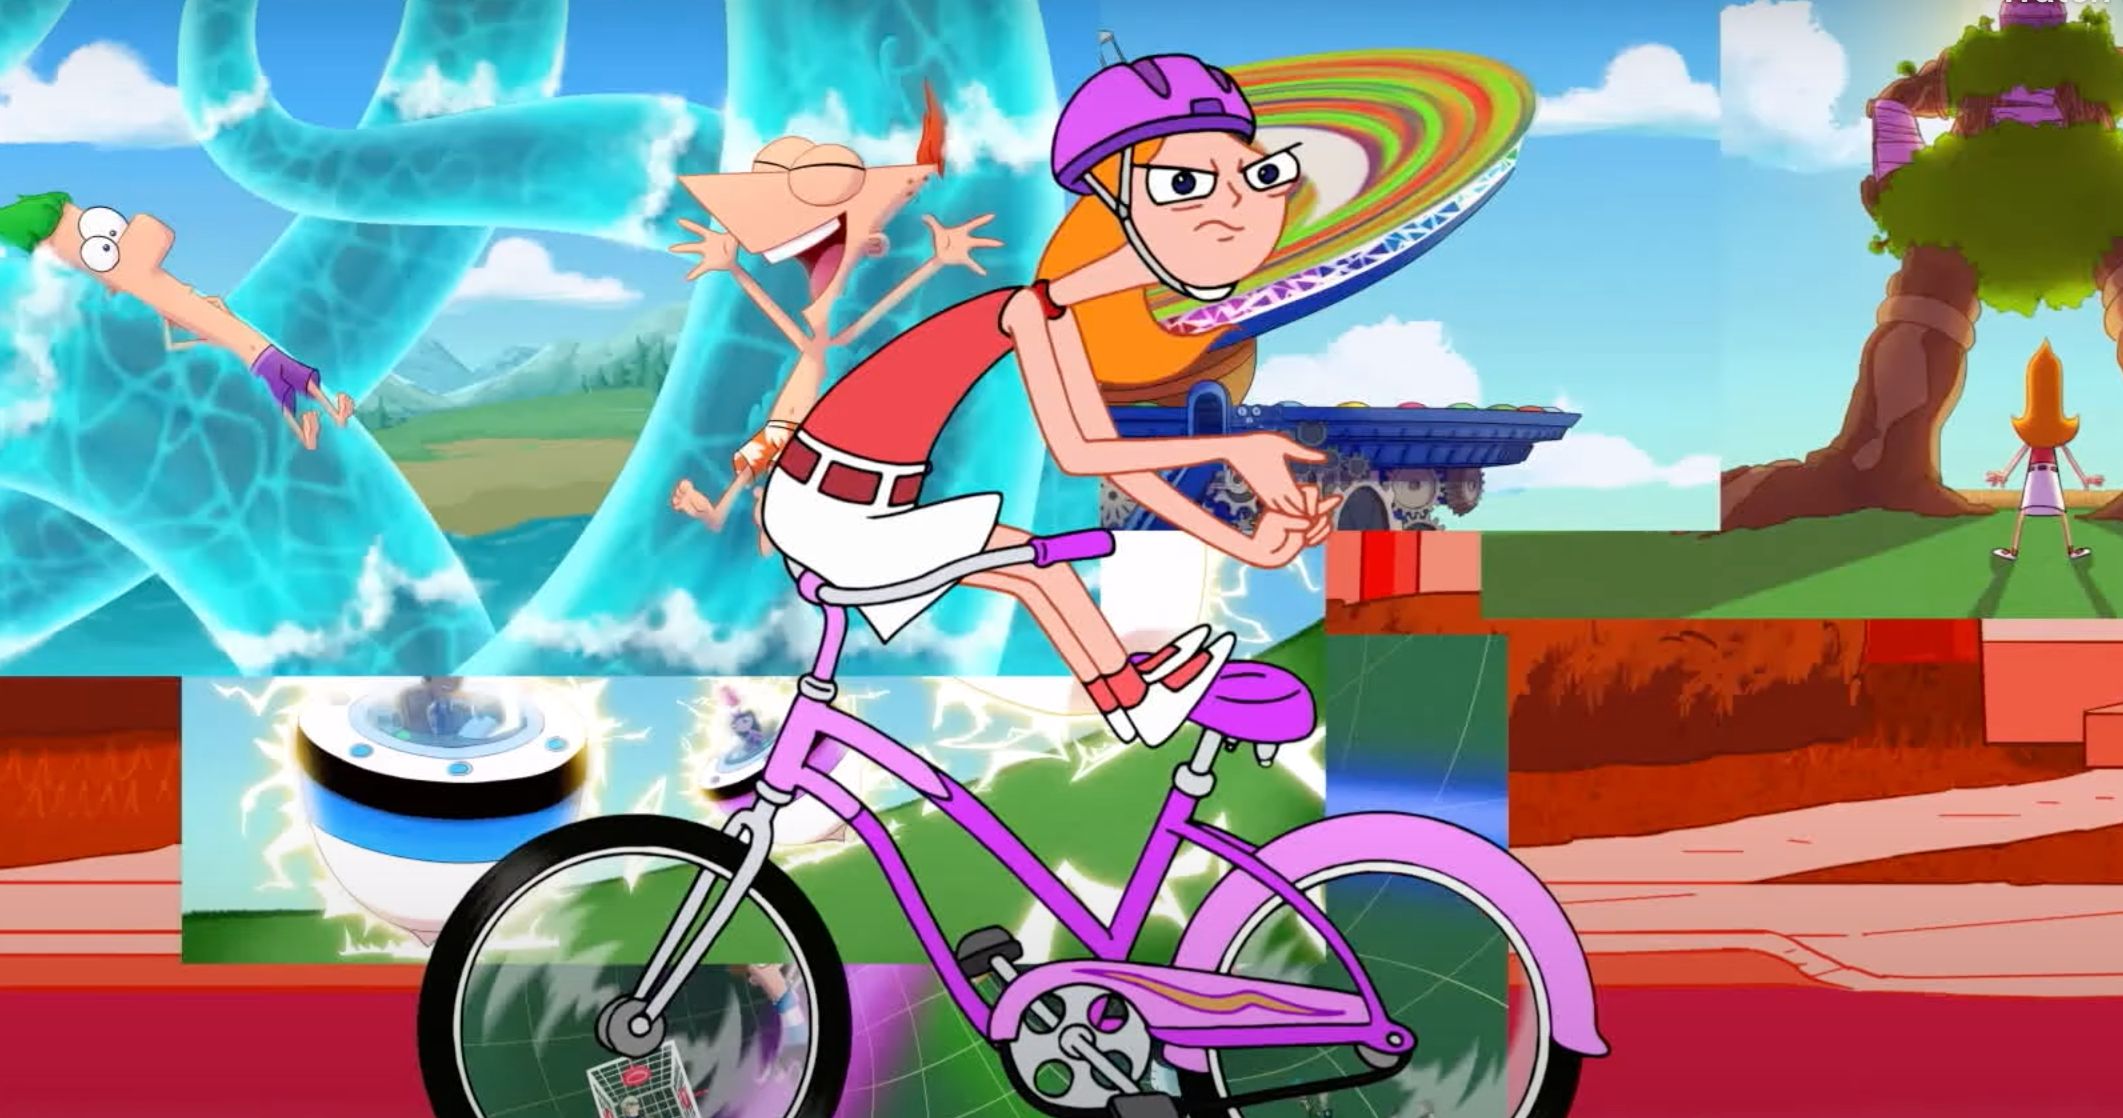 Phineas and Ferb the Movie: Candace Against the Universe Opening Scene Revealed at Comic-Con